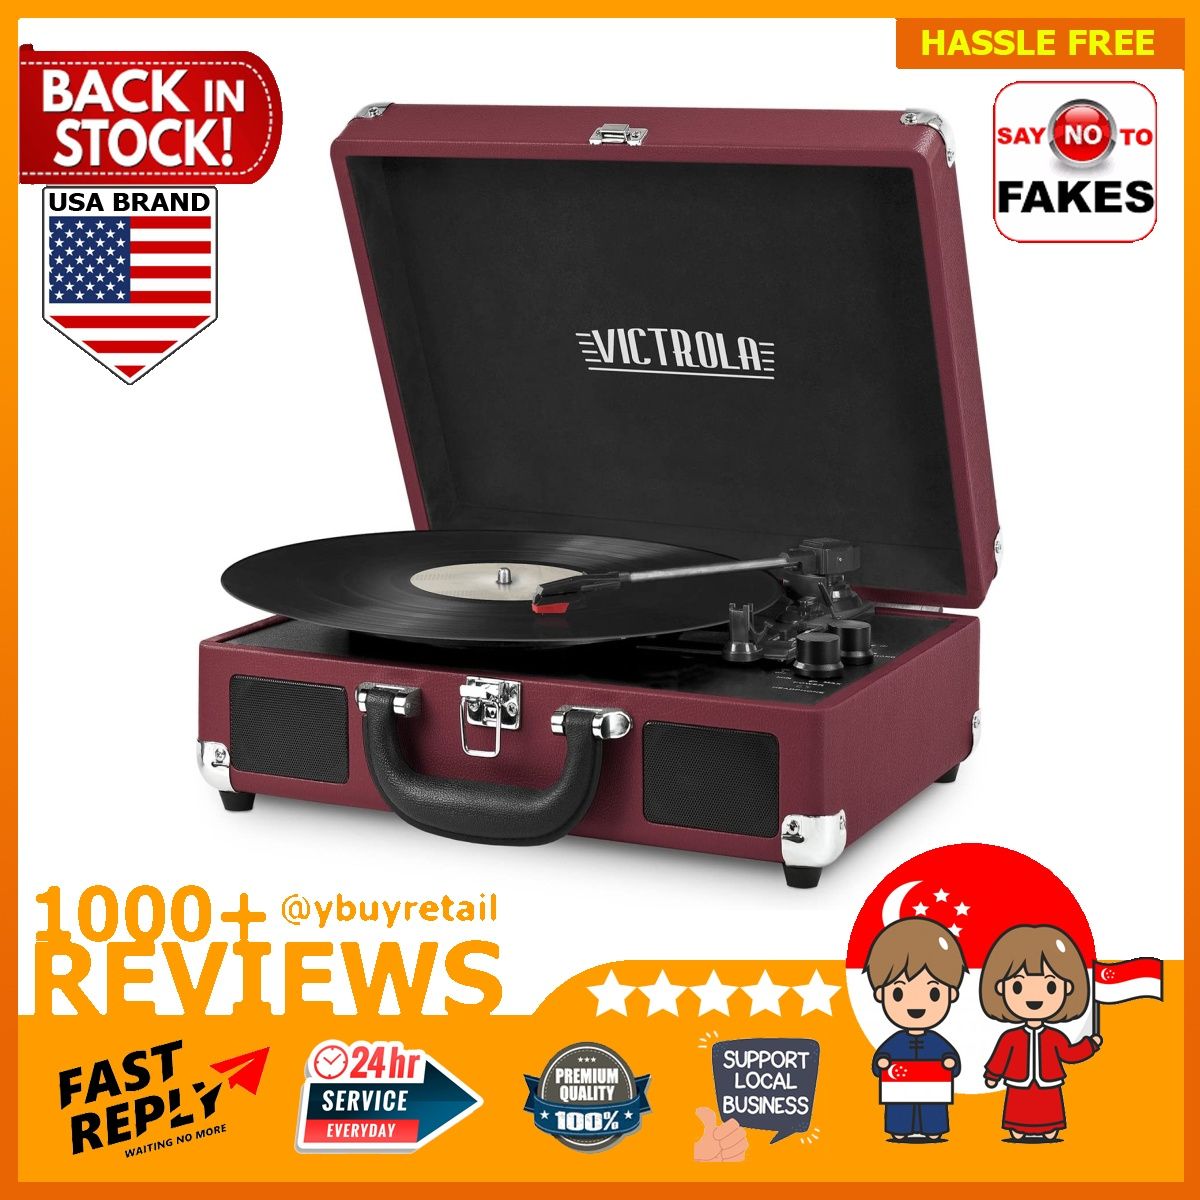 Includes　Toys,　Vinyls　Record　Portable　Sound|　Extra　Turntable　USA　Built-in　Music　BML]　3-Speed　Victrola　Audio　Hobbies　Player　Suitcase　Carousell　Vintage　Bluetooth　Upgraded　Stylus,　with　on　Speakers　Media,